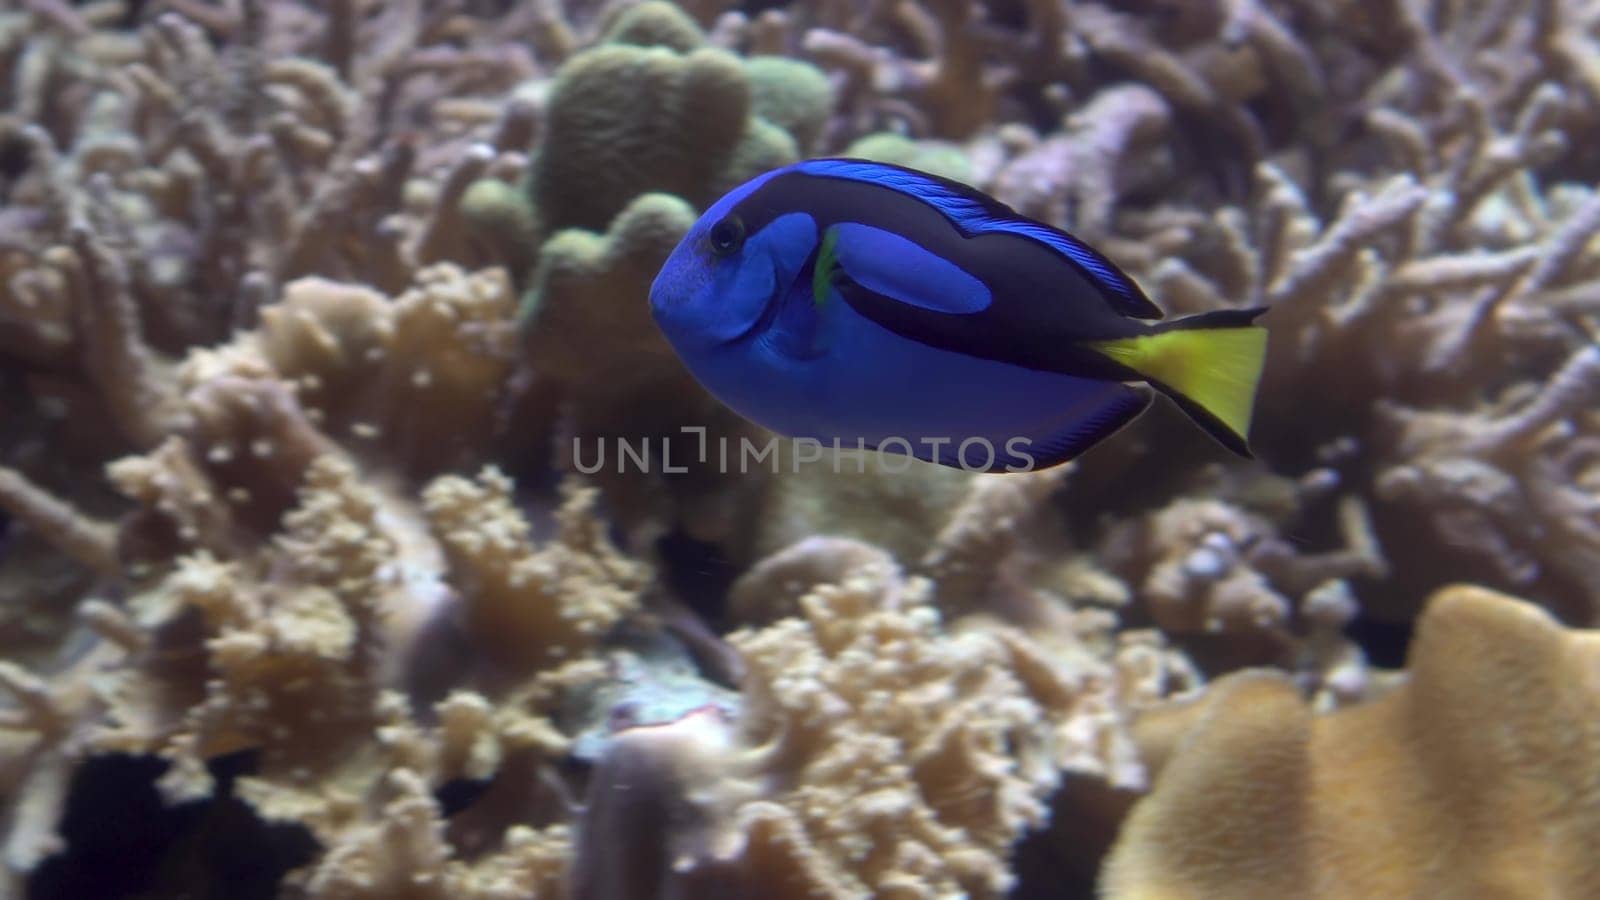 Exotic surgeon fish swims near sea anemones and corals. A blue fish swims in an aquarium. 4k